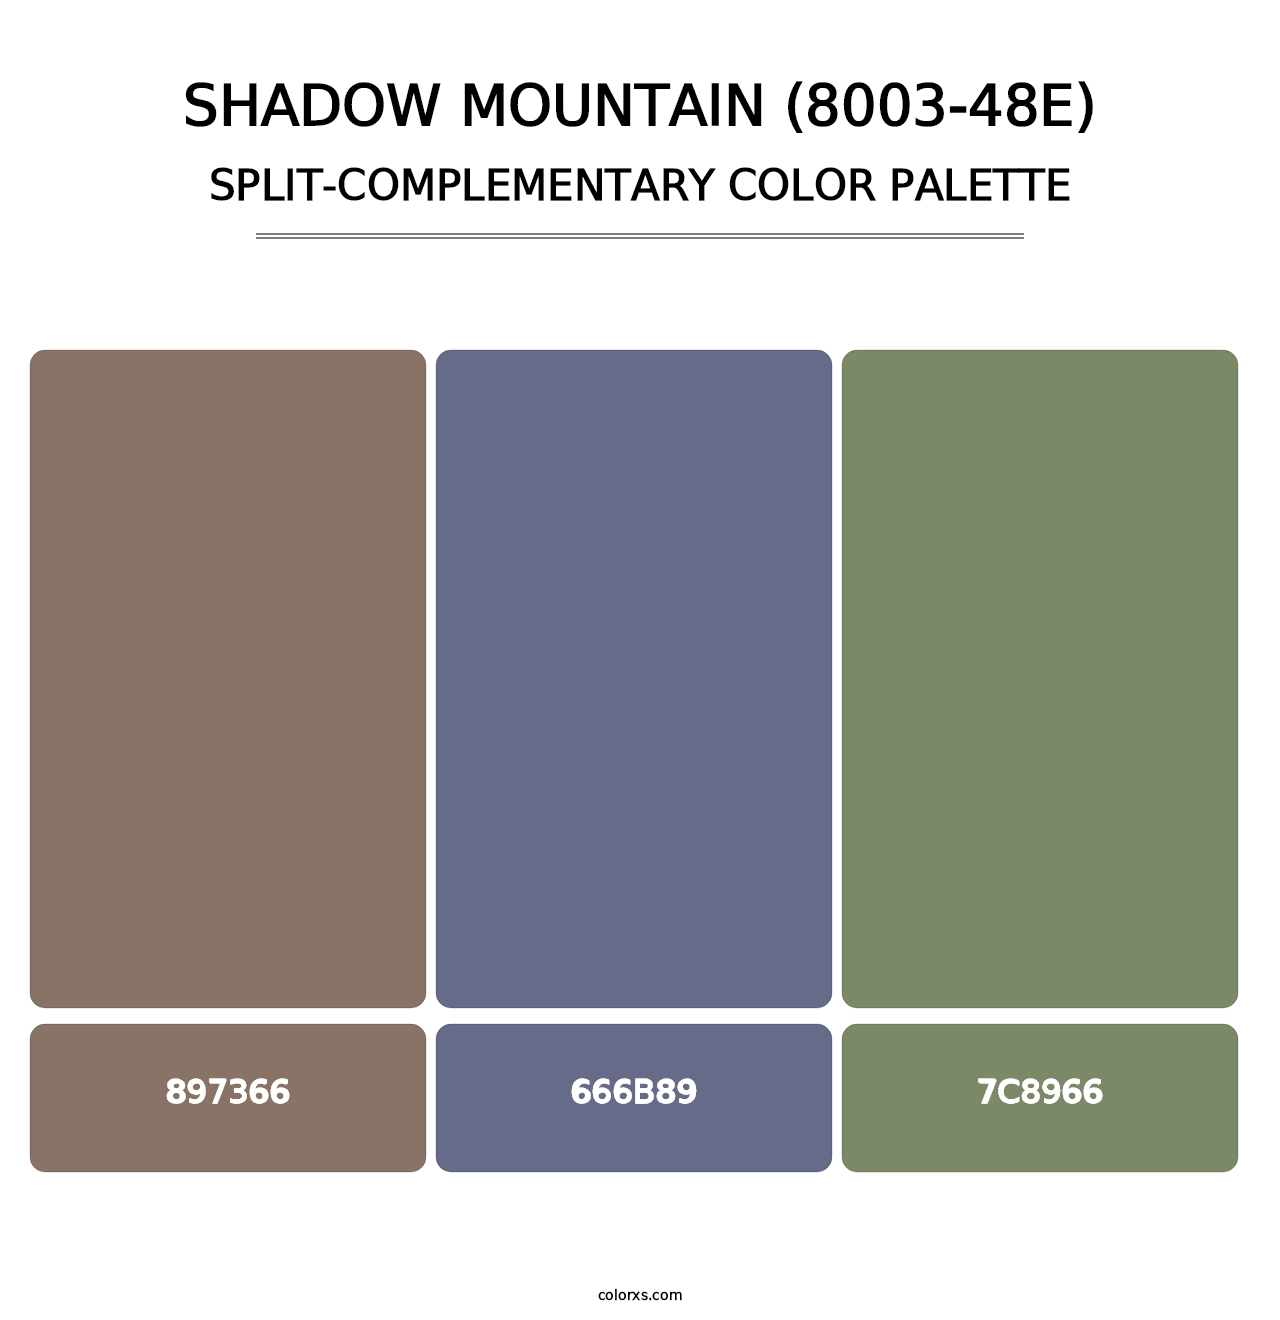 Shadow Mountain (8003-48E) - Split-Complementary Color Palette